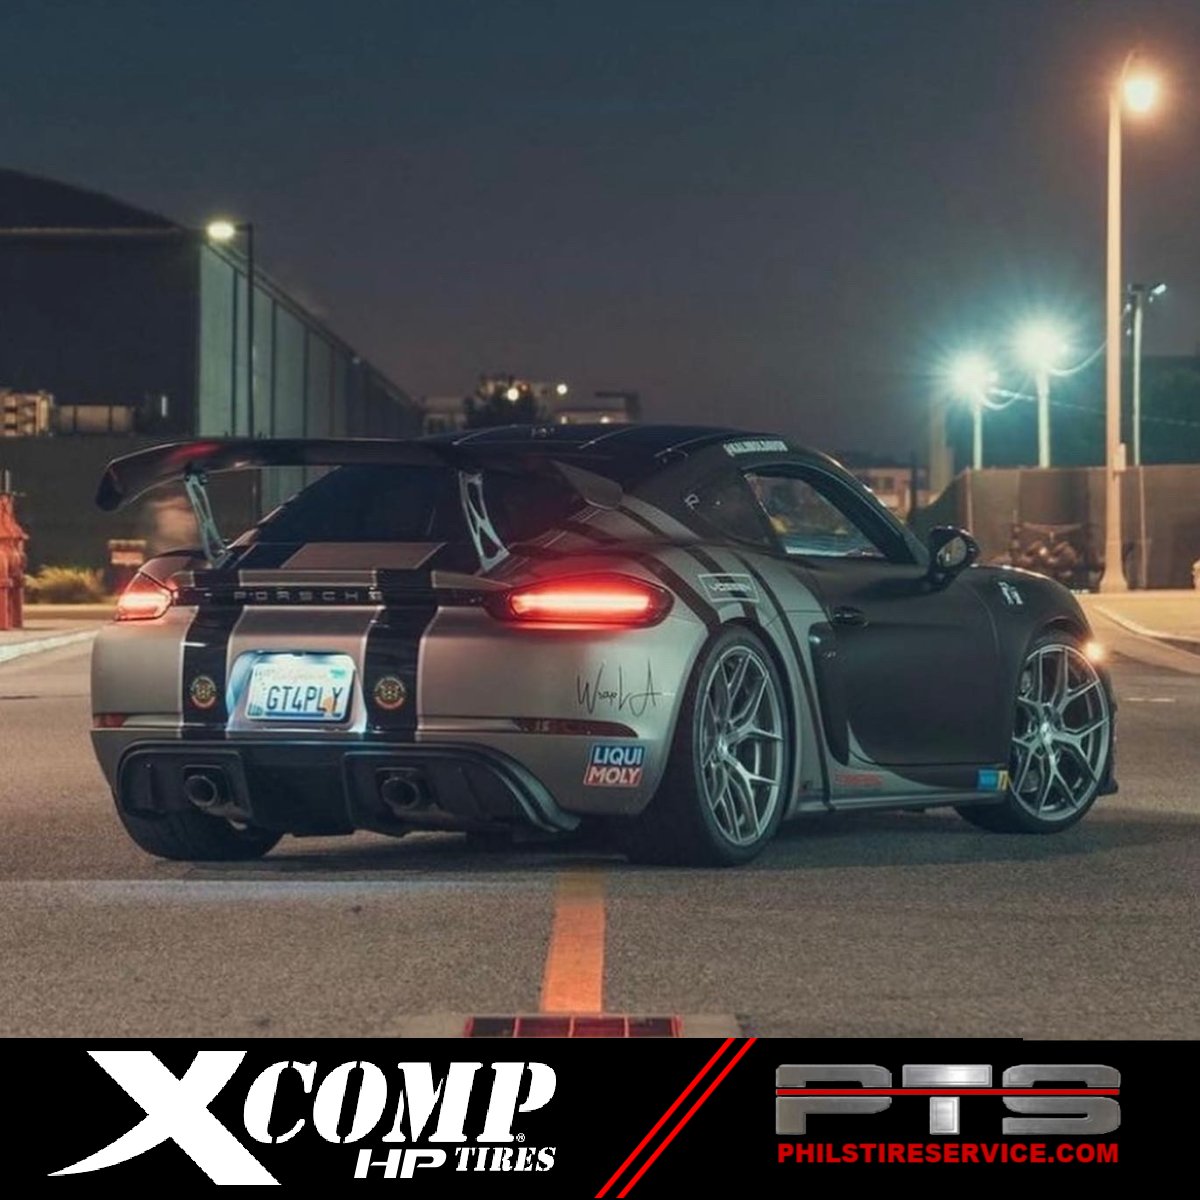 Experience The Difference Of XCOMP. philstireservice.com #XCOMP #xcomptires #philstireservice #porsche #gt2rs #gt3 #lambo #McLaren #longtailrally #audi #Ferrari #Shelby #Huracan #tiretuesday